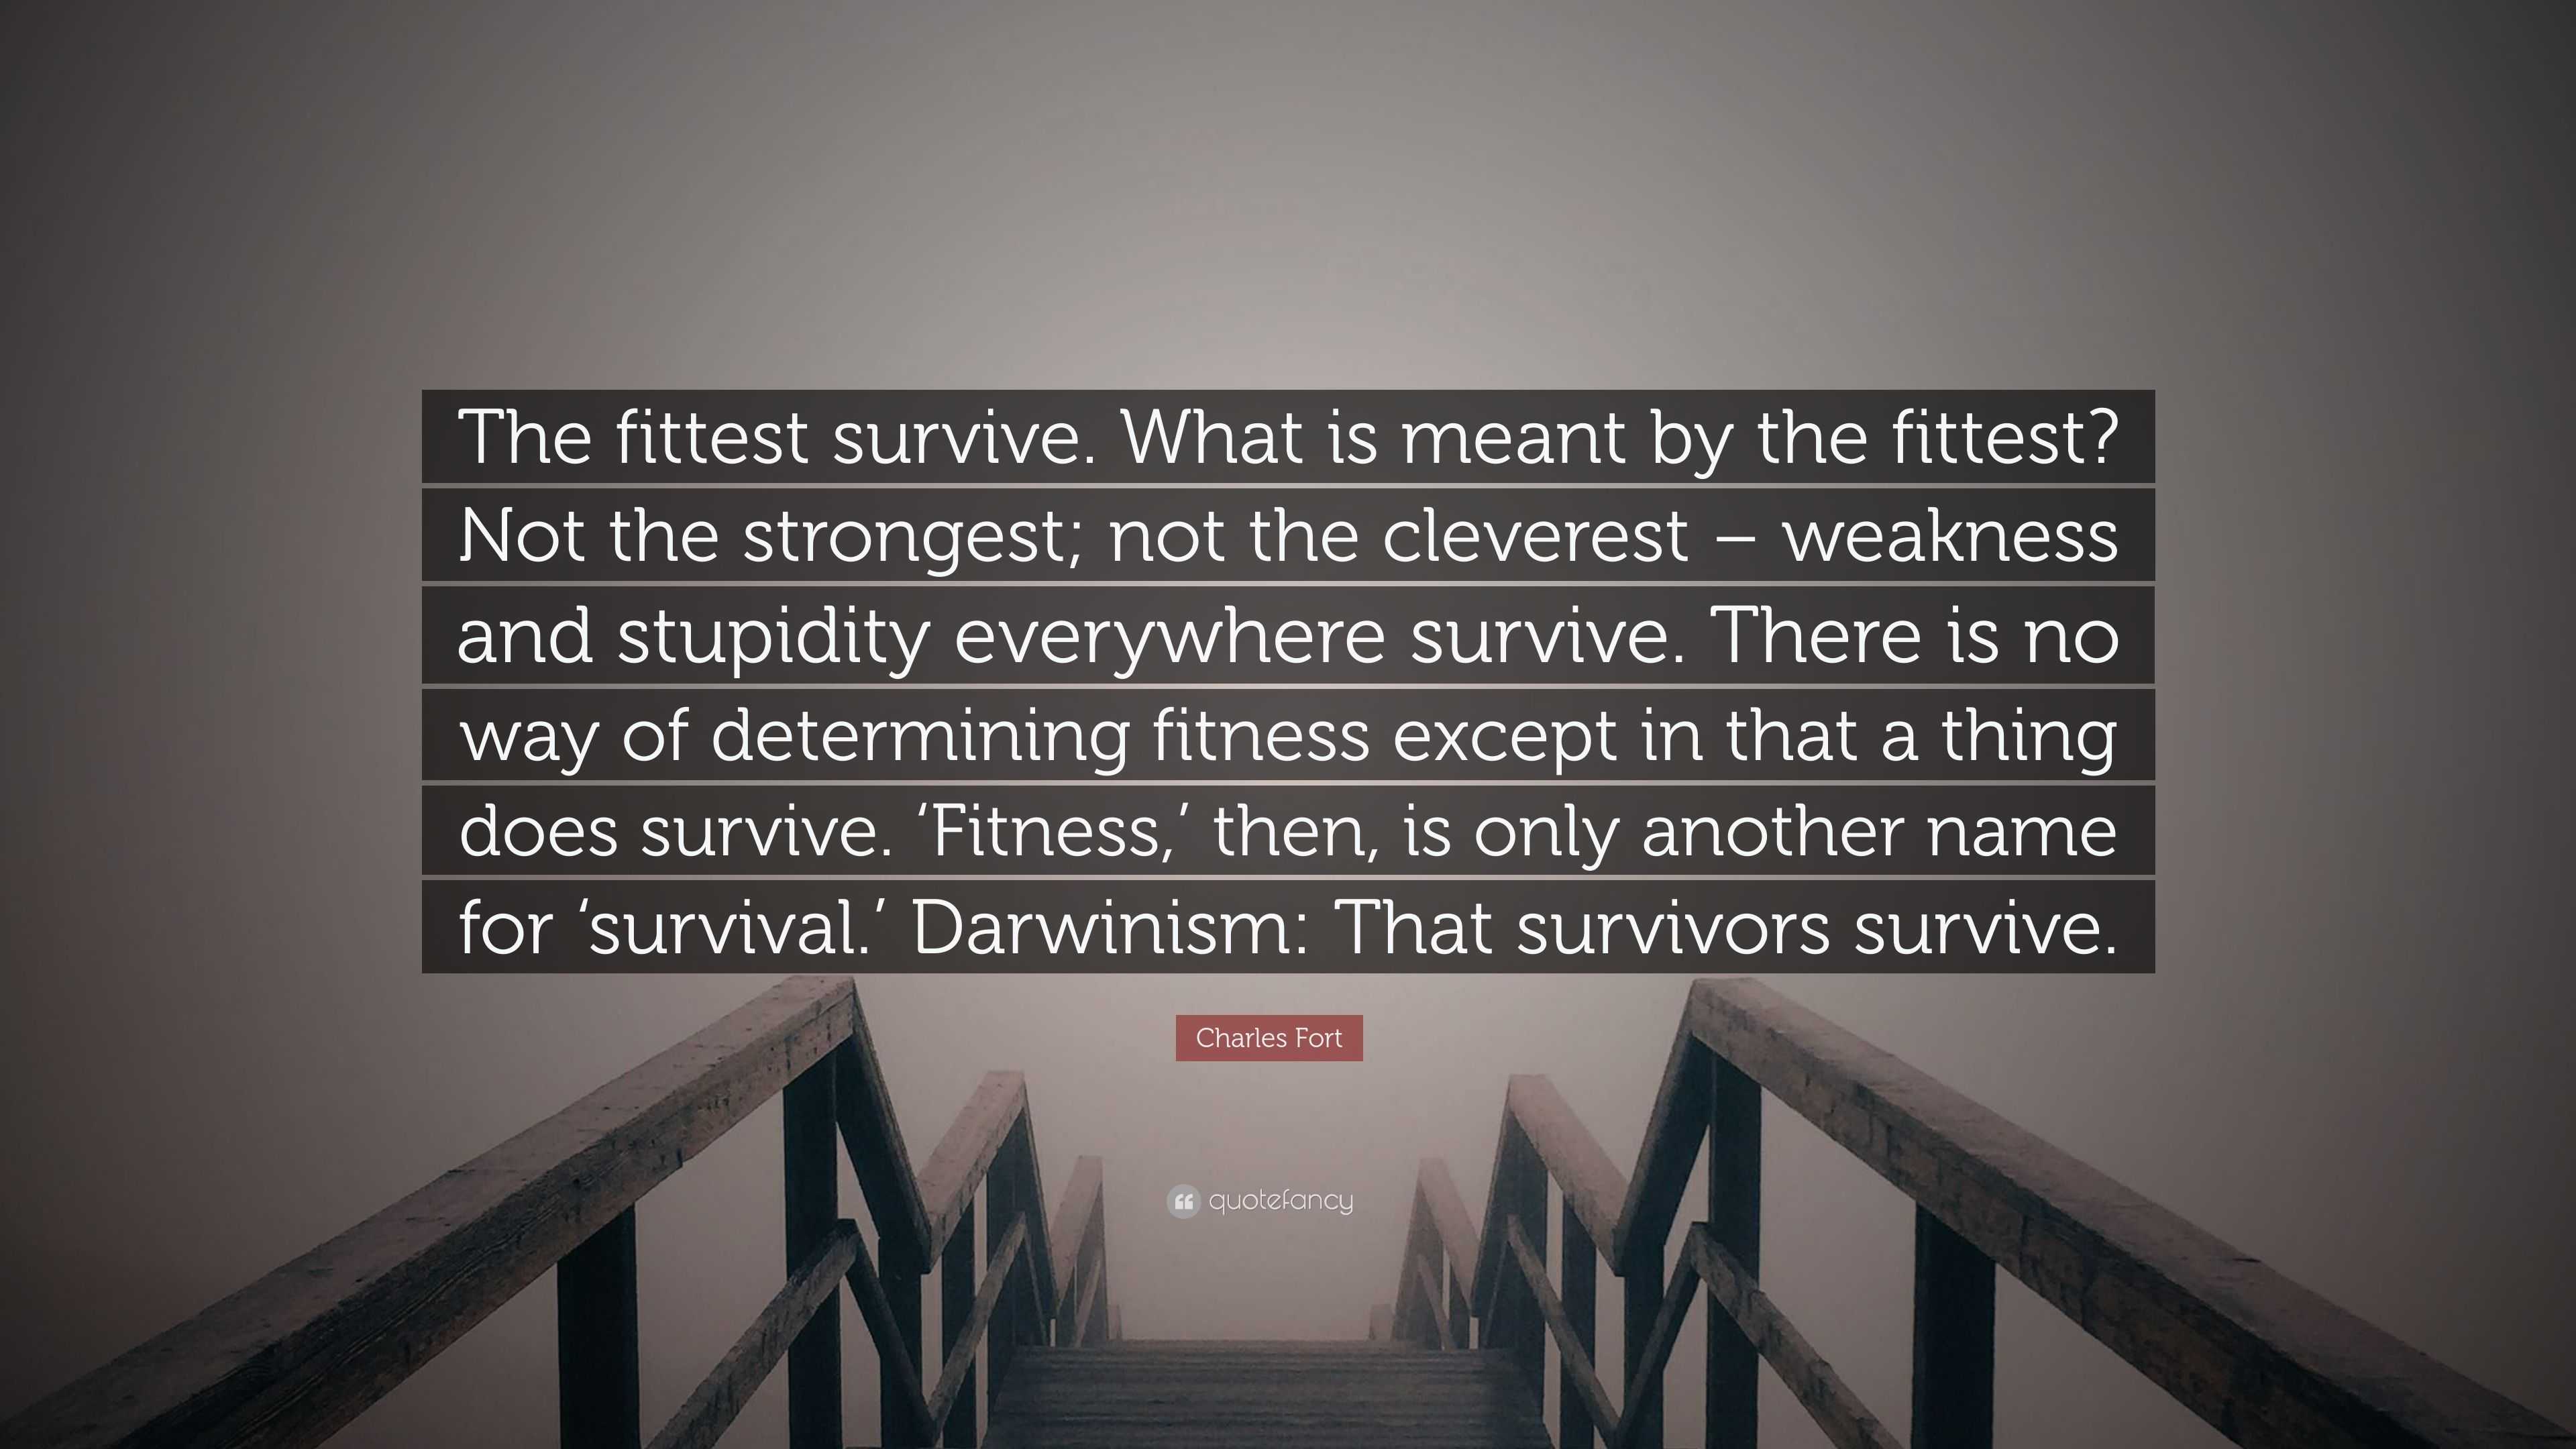 Survival of the Fittest, Only the Strong Survive - Fact or Myth?